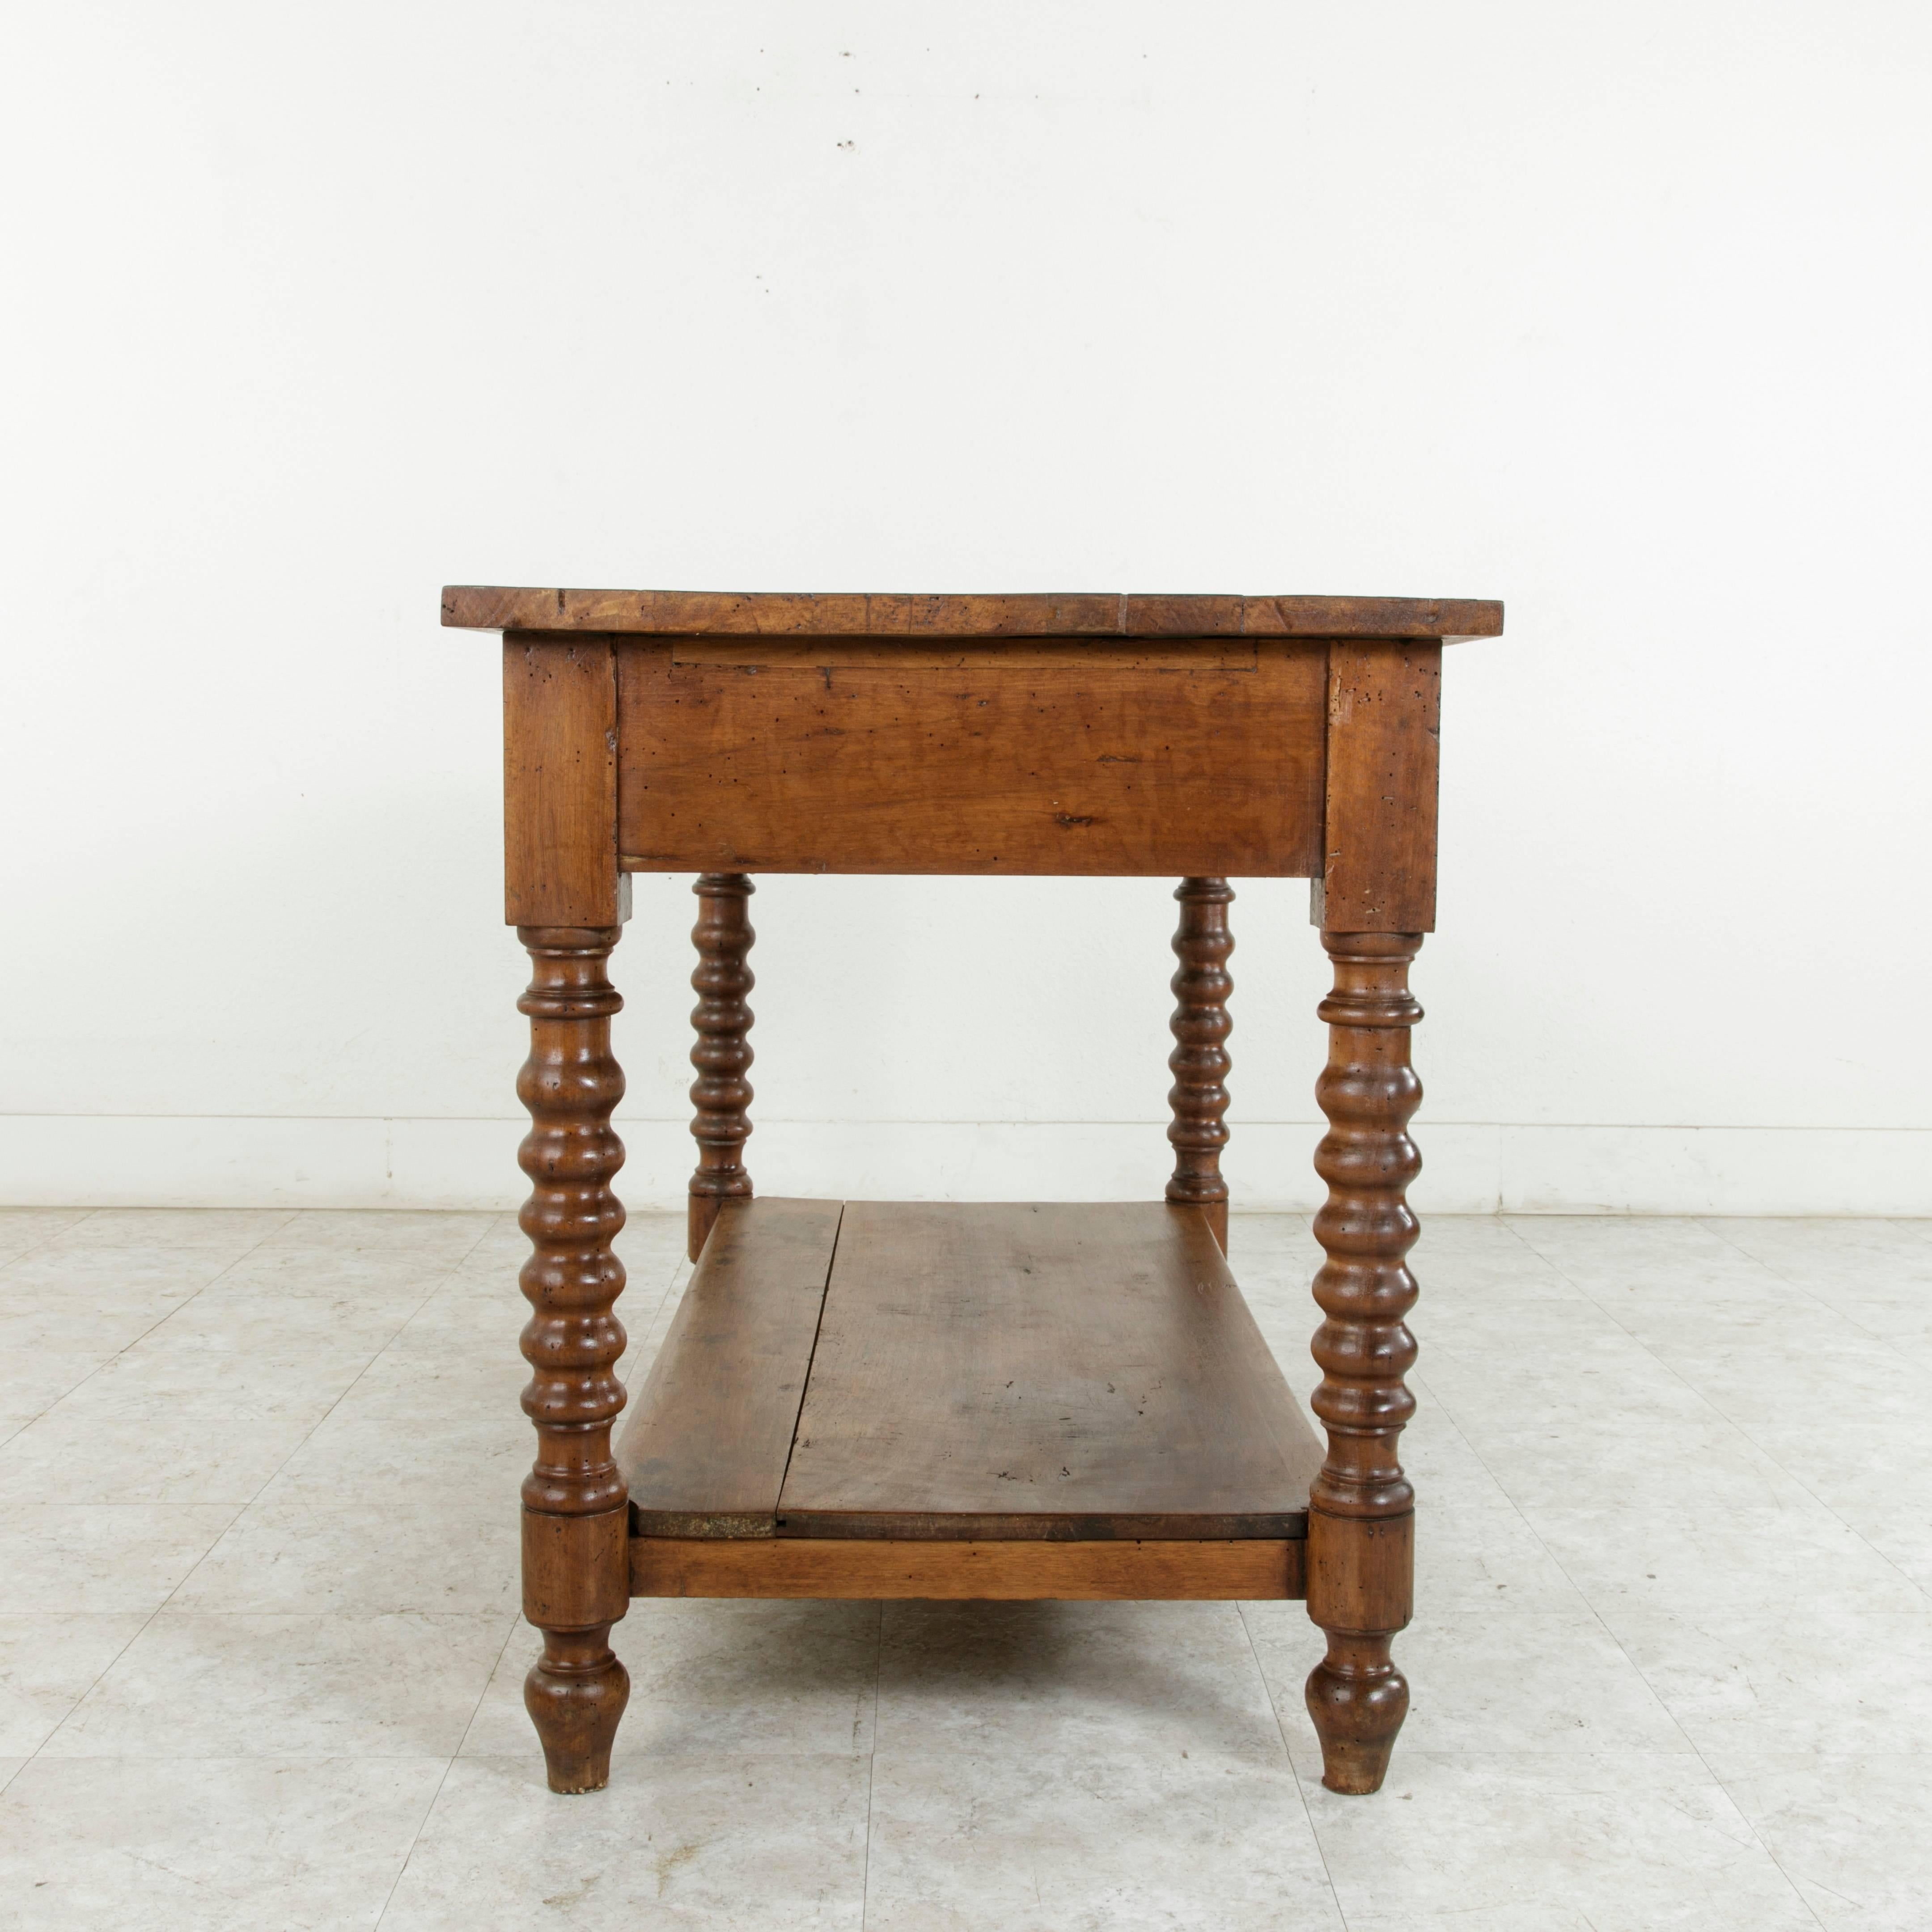 19th Century French Walnut Draper's Table or Kitchen Island with Drawer 1